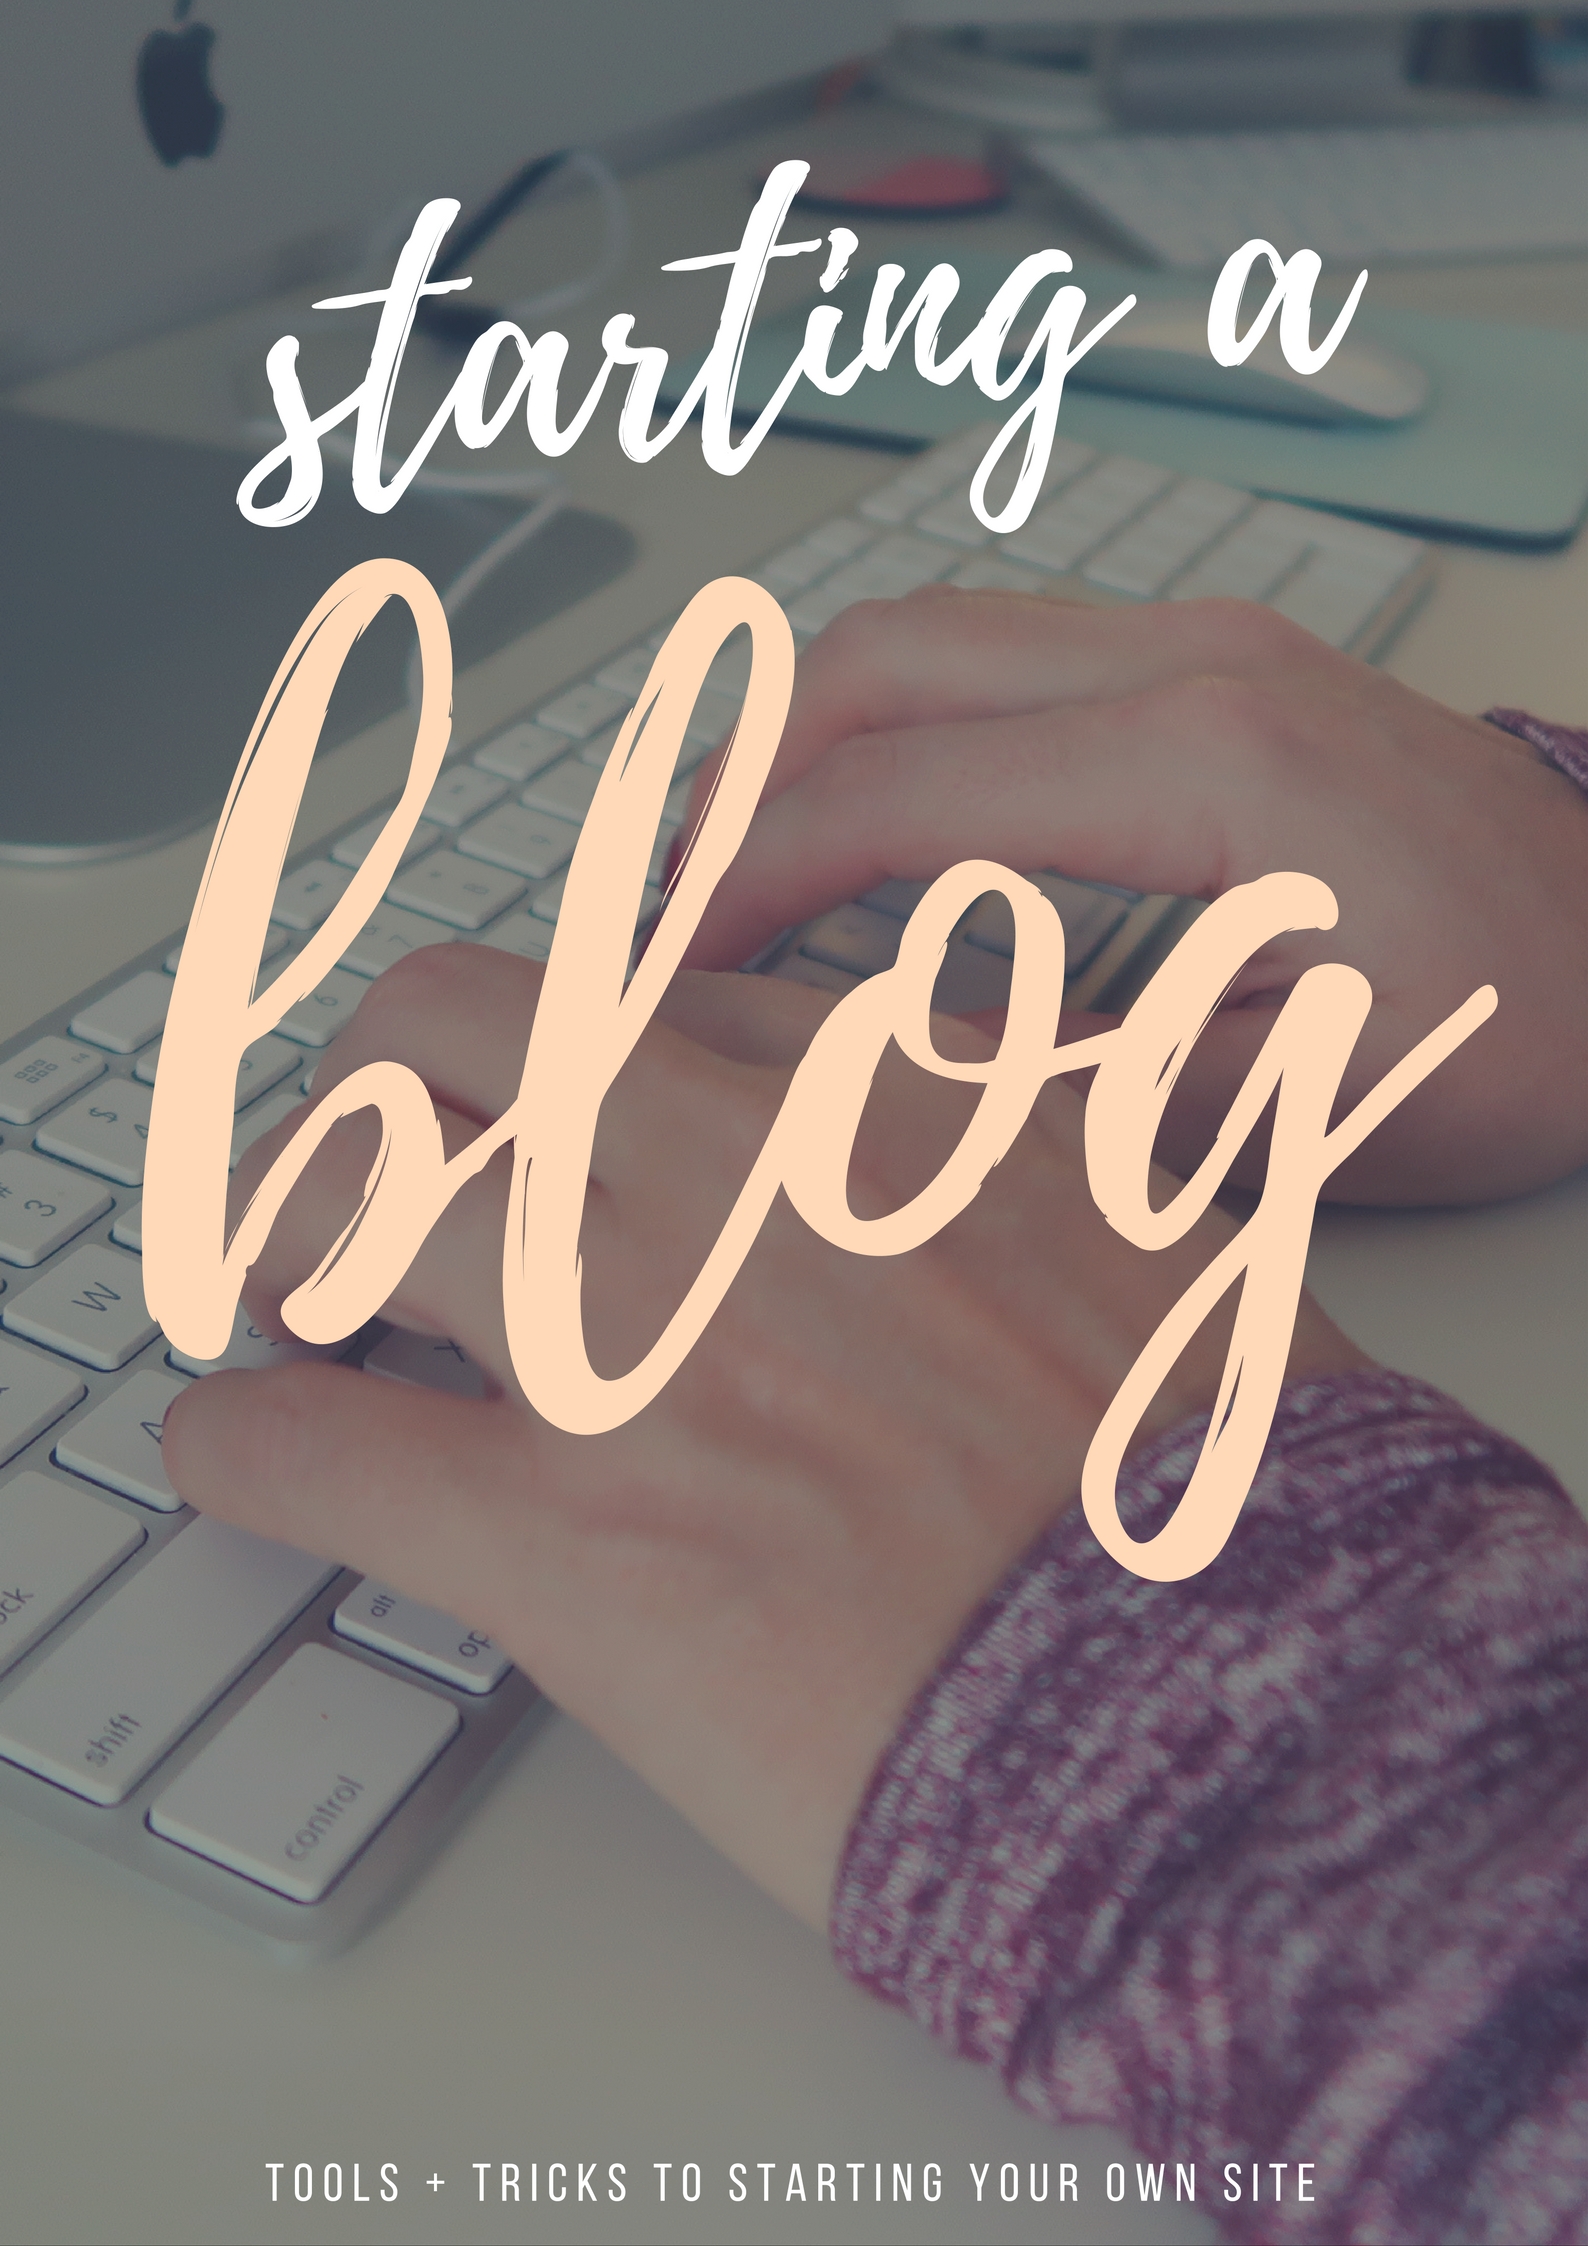 The Basics of Blogging: Everything You Need to Know from Hosting to Scheduling Apps